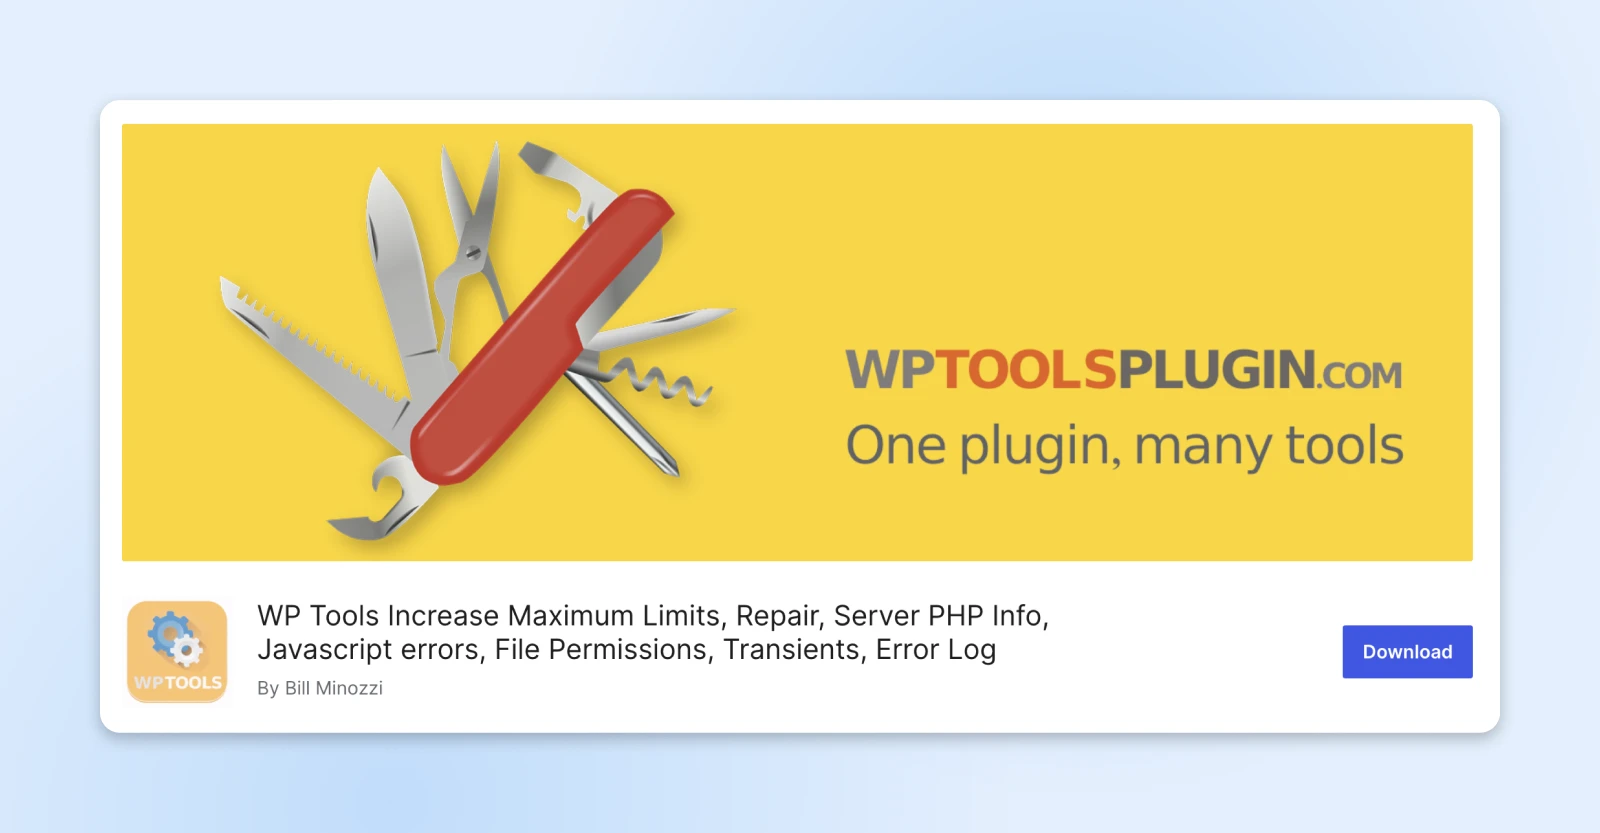 WPTOOLSPLUGIN.COM cover image of a Swiss knife, full plugin title below, and a blue Download button.